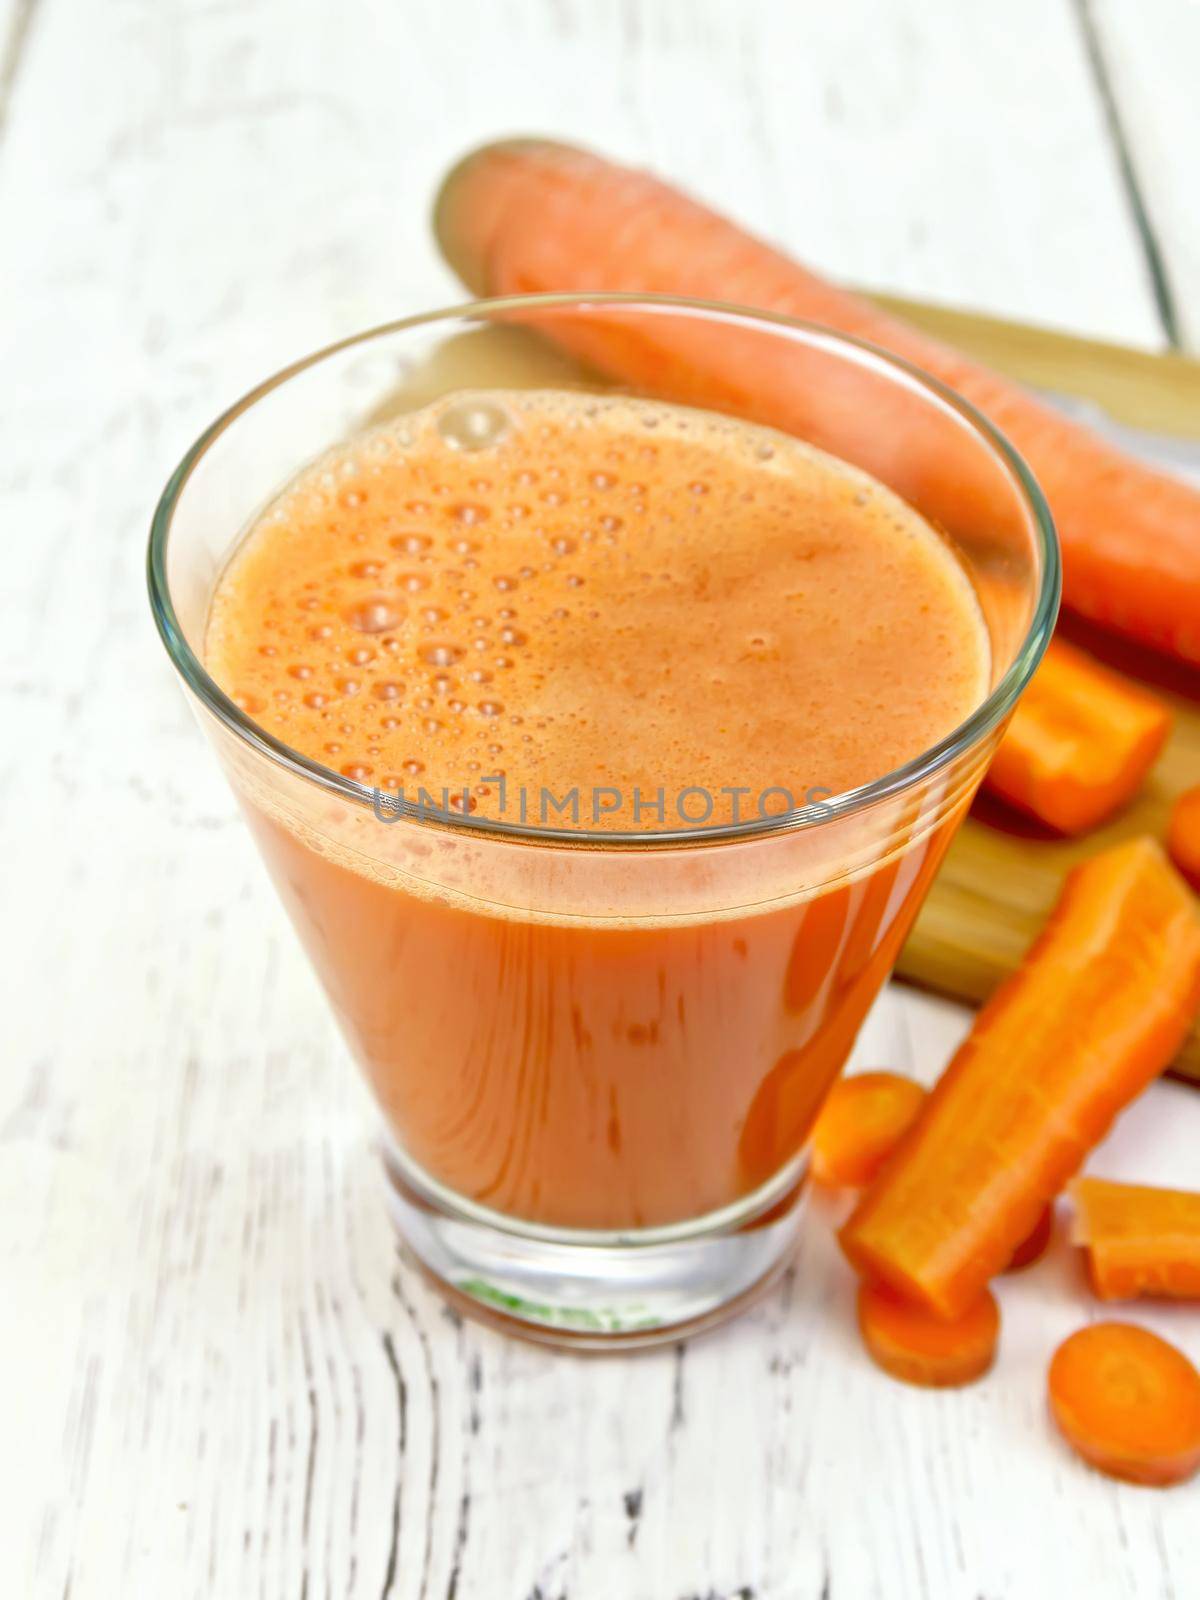 Juice carrot with vegetables on board by rezkrr